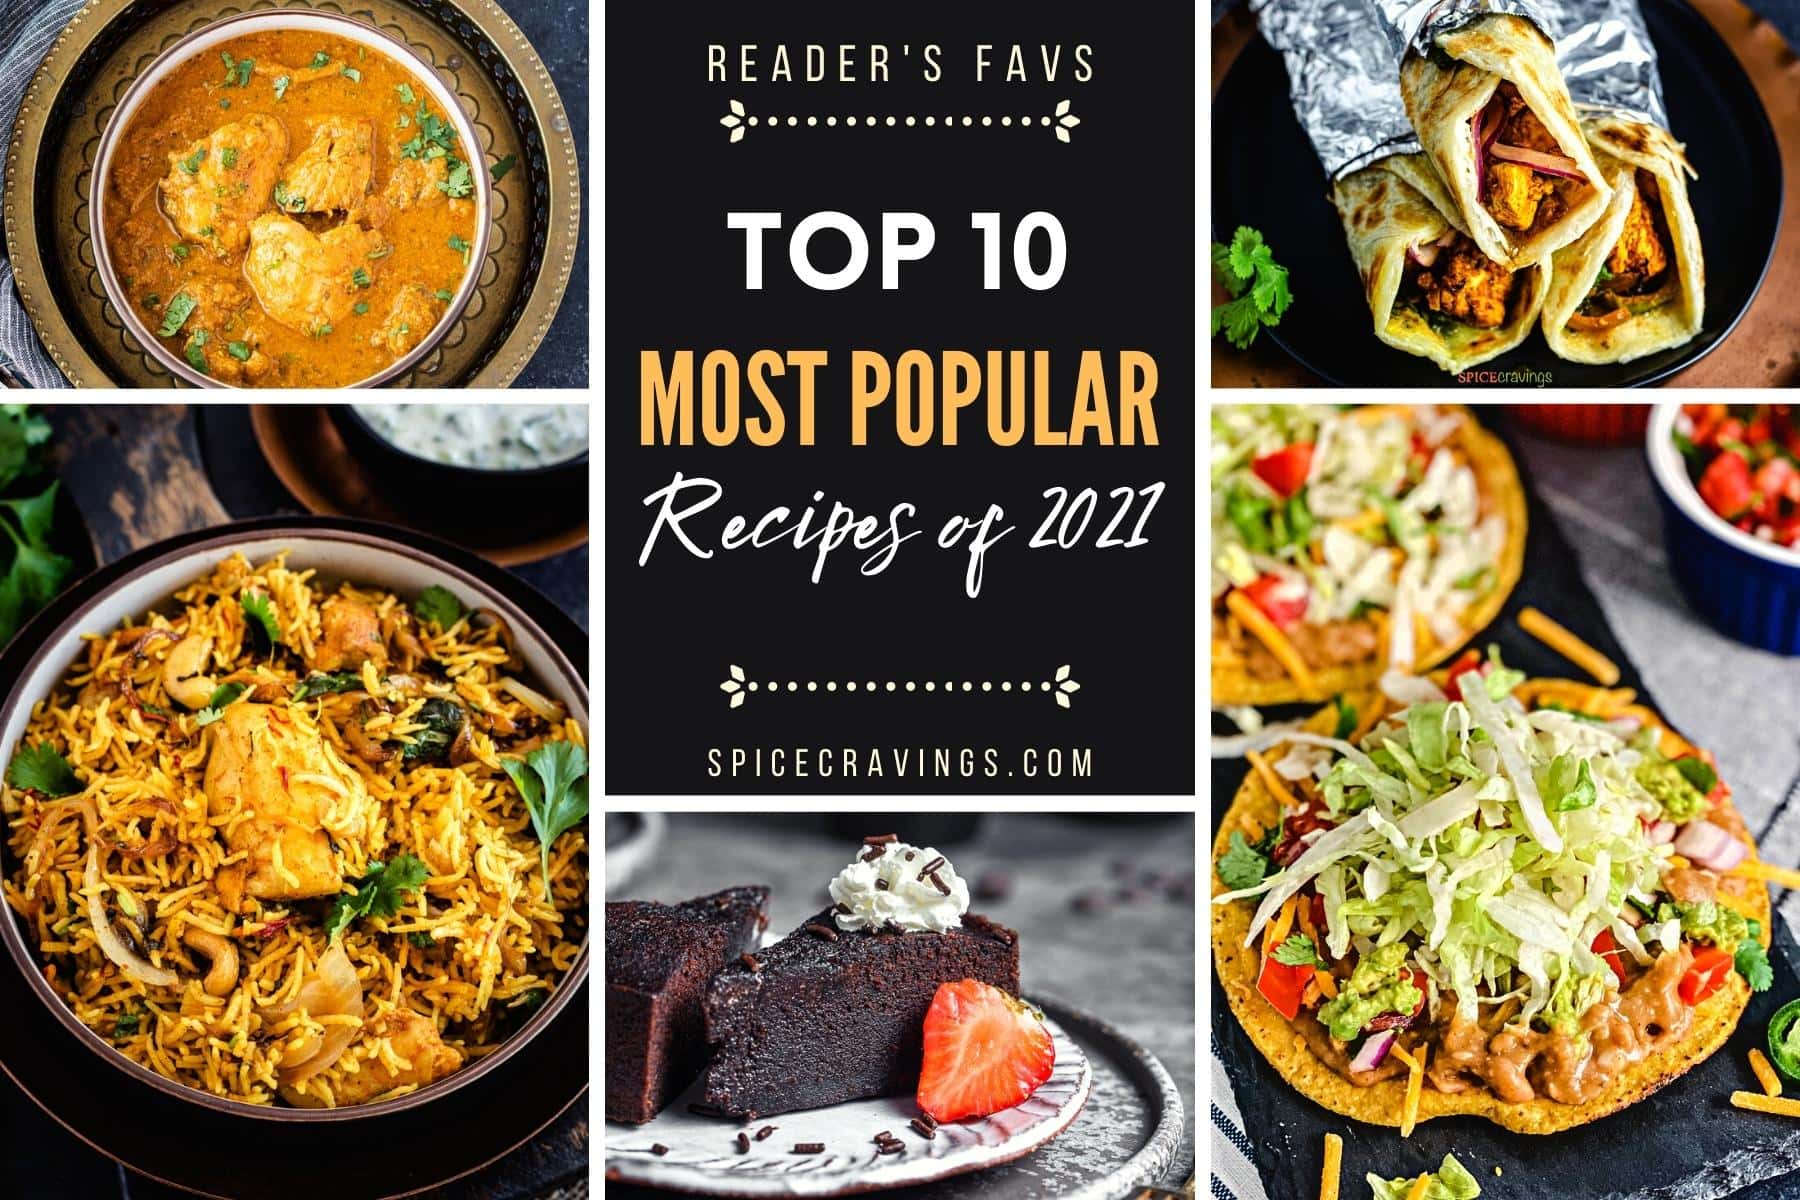 5-image poster of recipes with caption "Top 10 Most Popular Recipes"